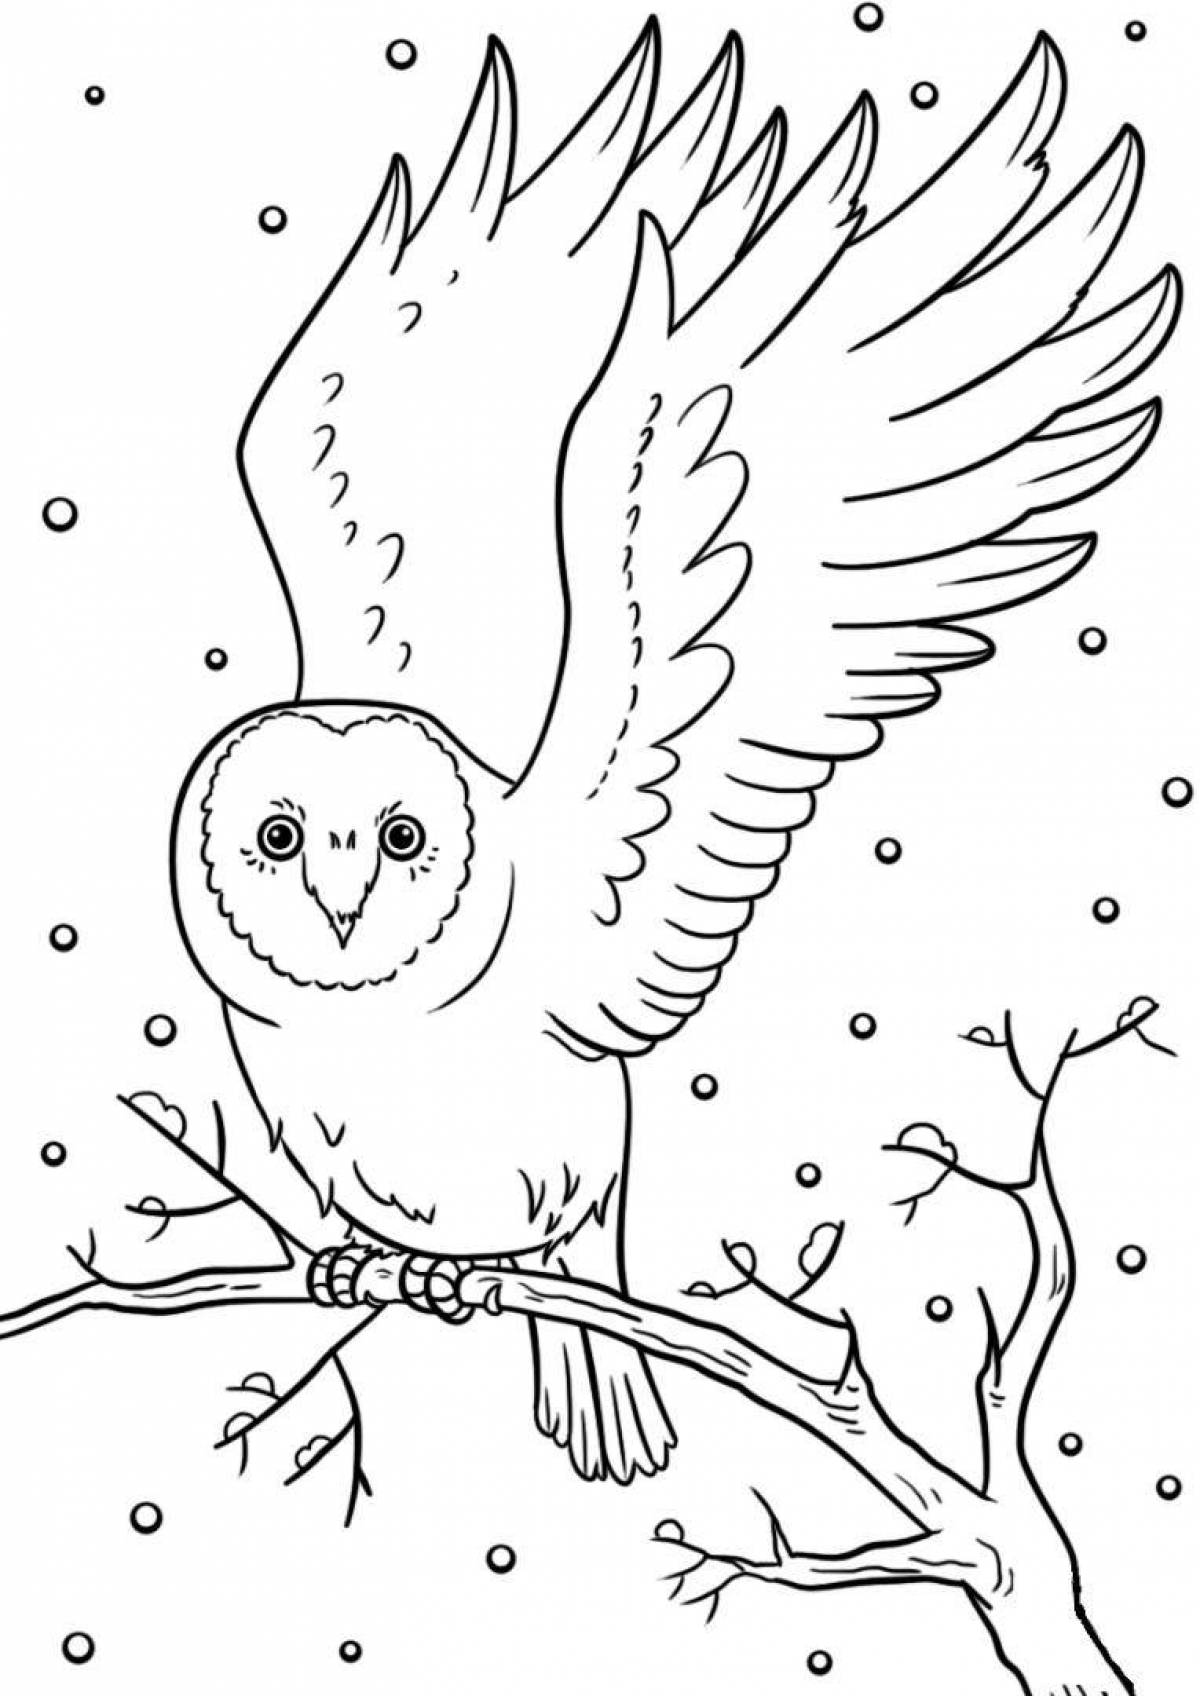 Live winter birds coloring book for kids